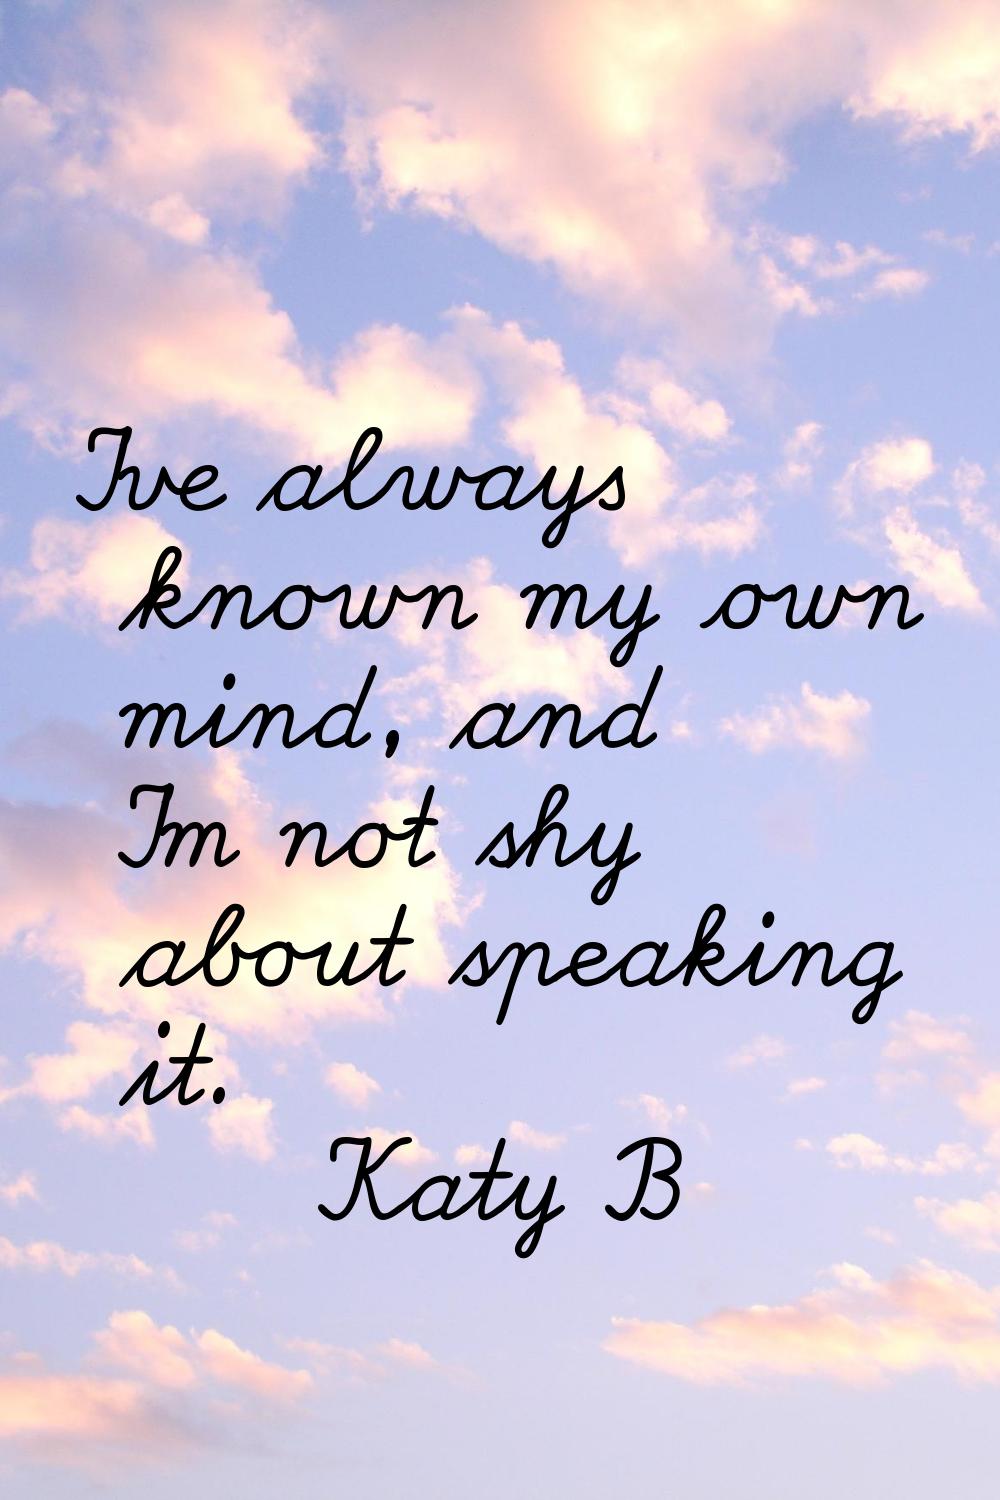 I've always known my own mind, and I'm not shy about speaking it.